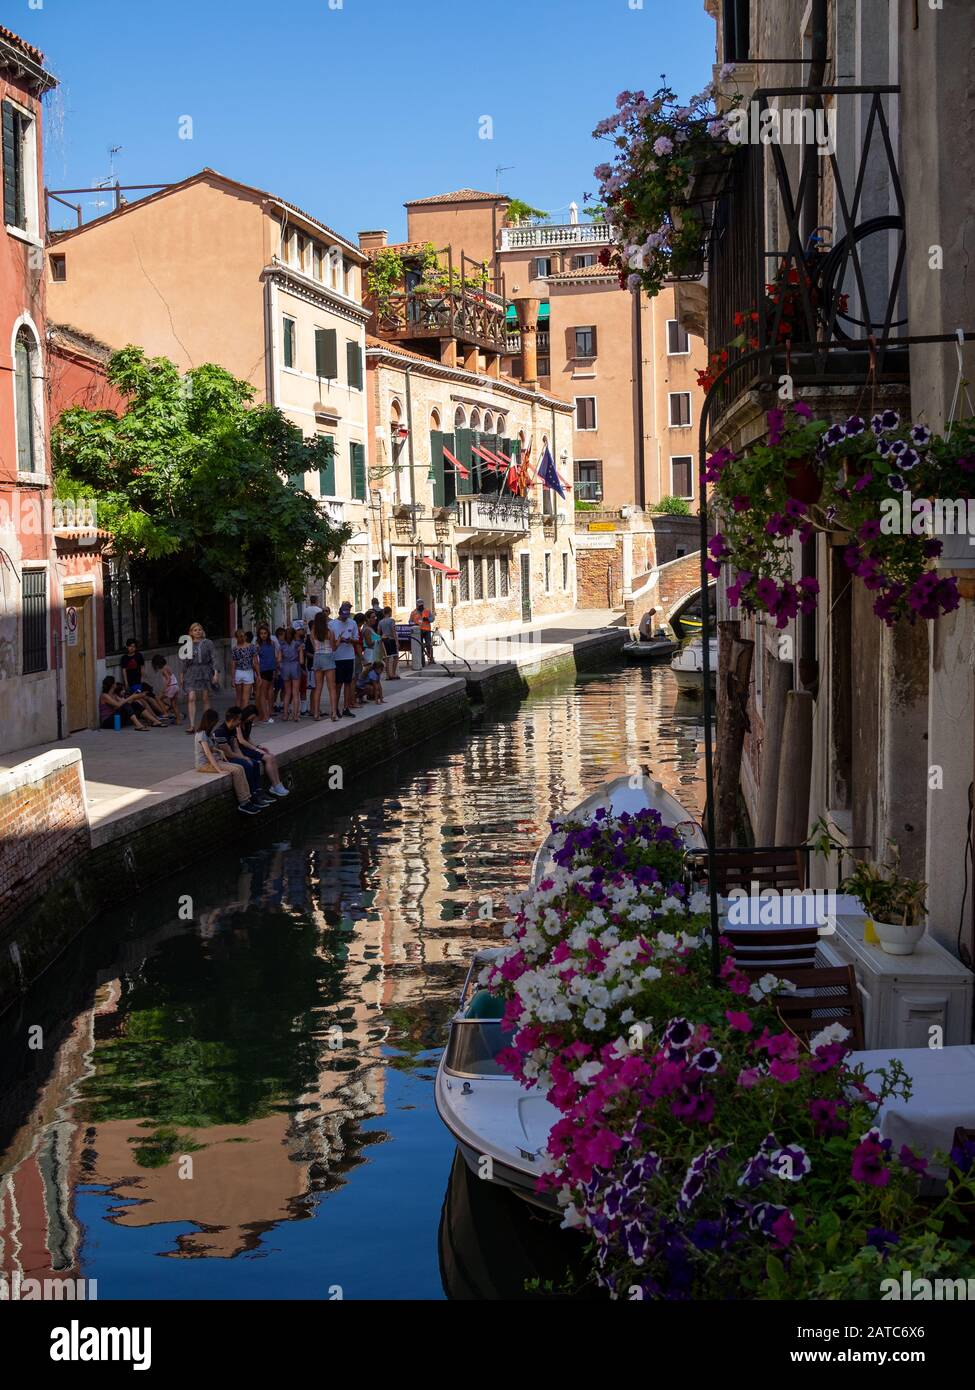 Gondola docked in a small canal in Venice Stock Photo